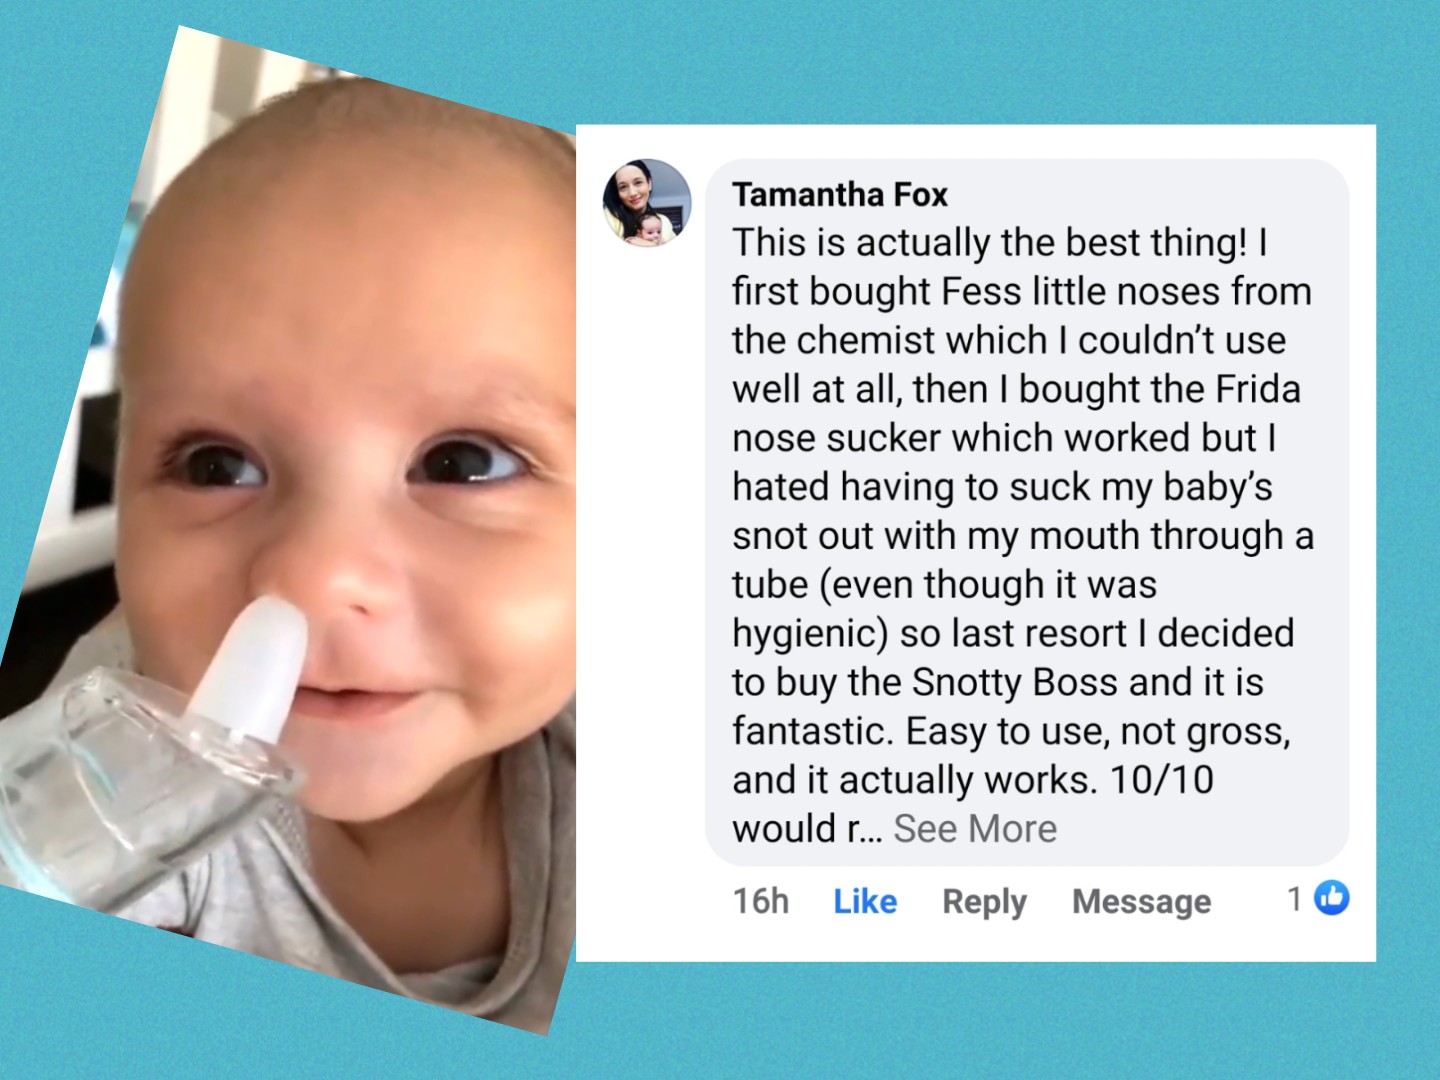 Snotty Boss snot sucker, clear baby's nose in seconds, help baby breathe easier